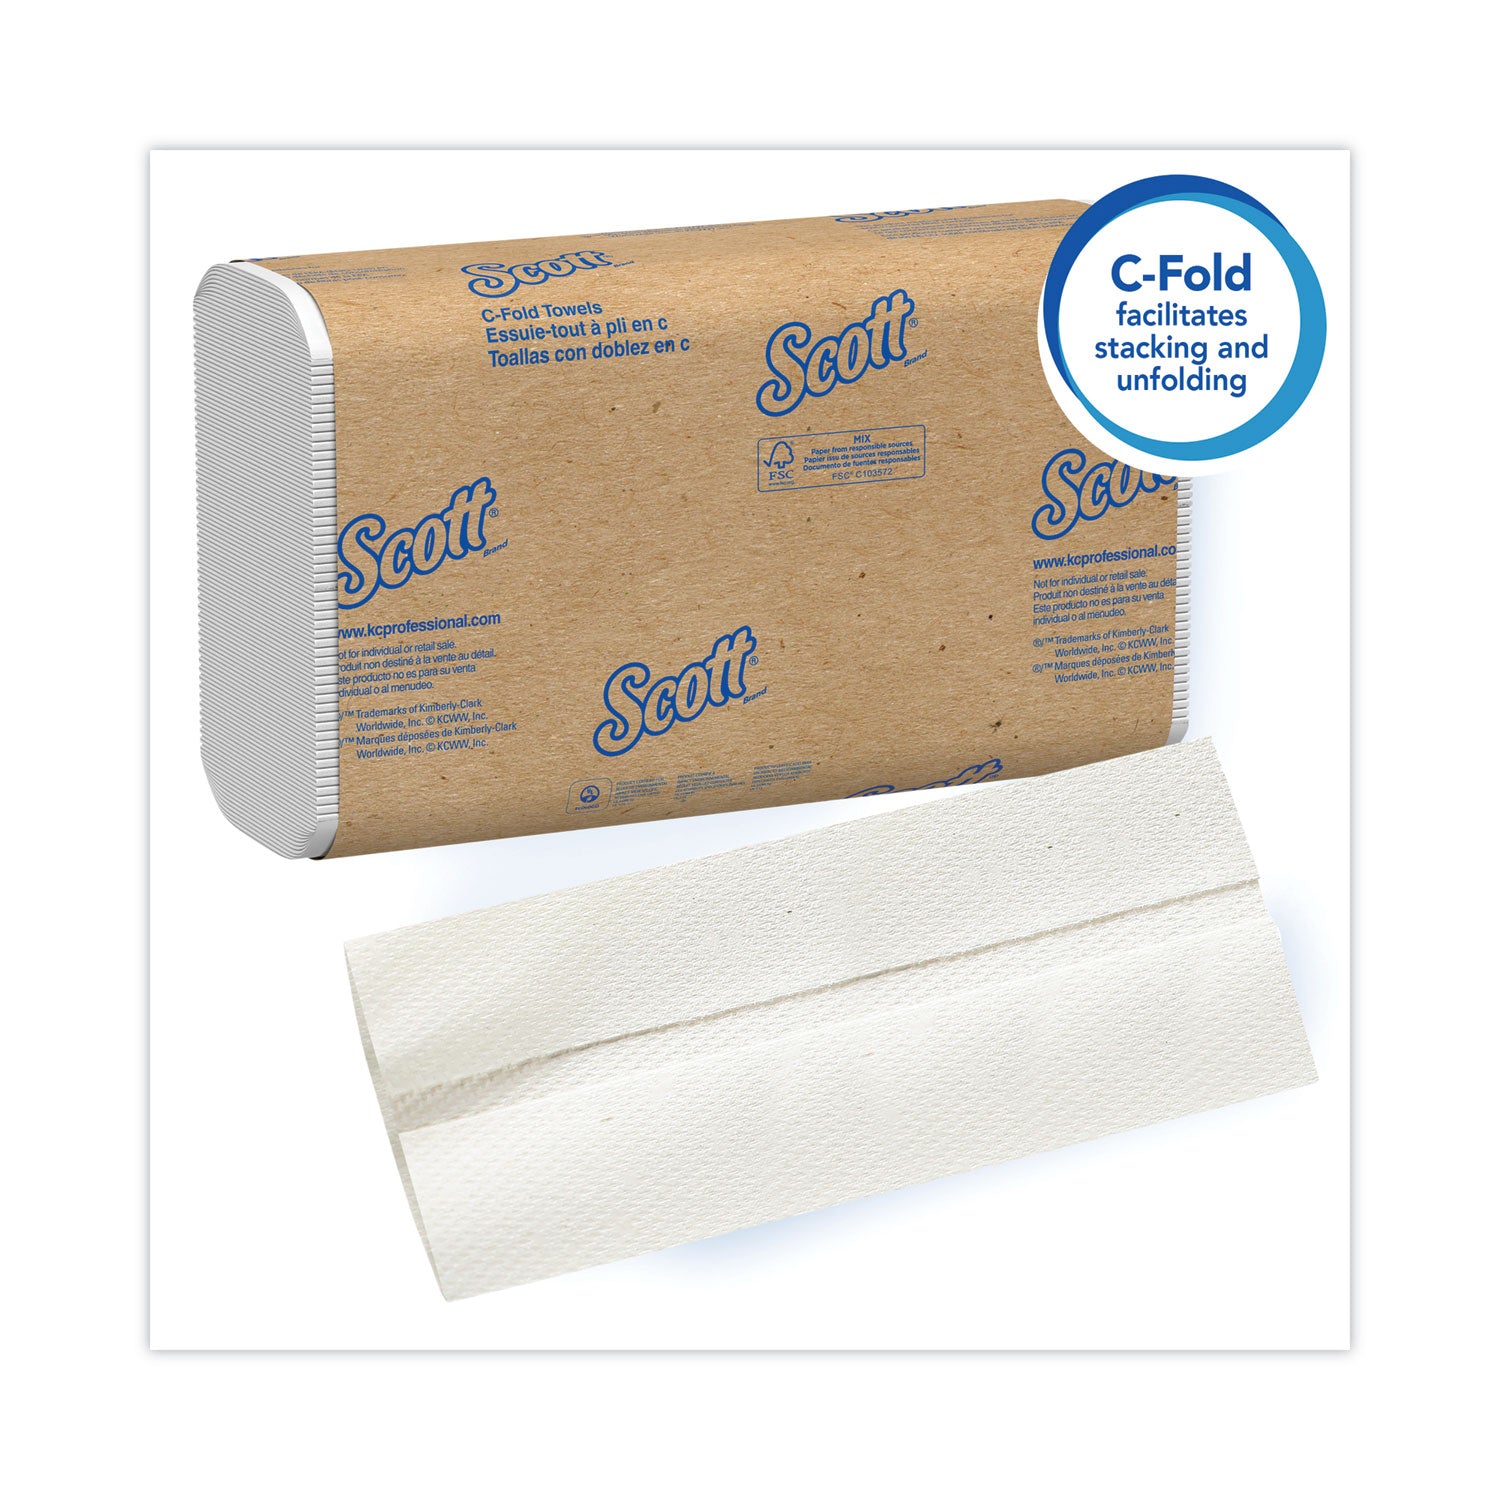 Essential C-Fold Towels for Business, Absorbency Pockets, 1-Ply, 10.13 x 13.15, White, 200/Pack, 12 Packs/Carton - 